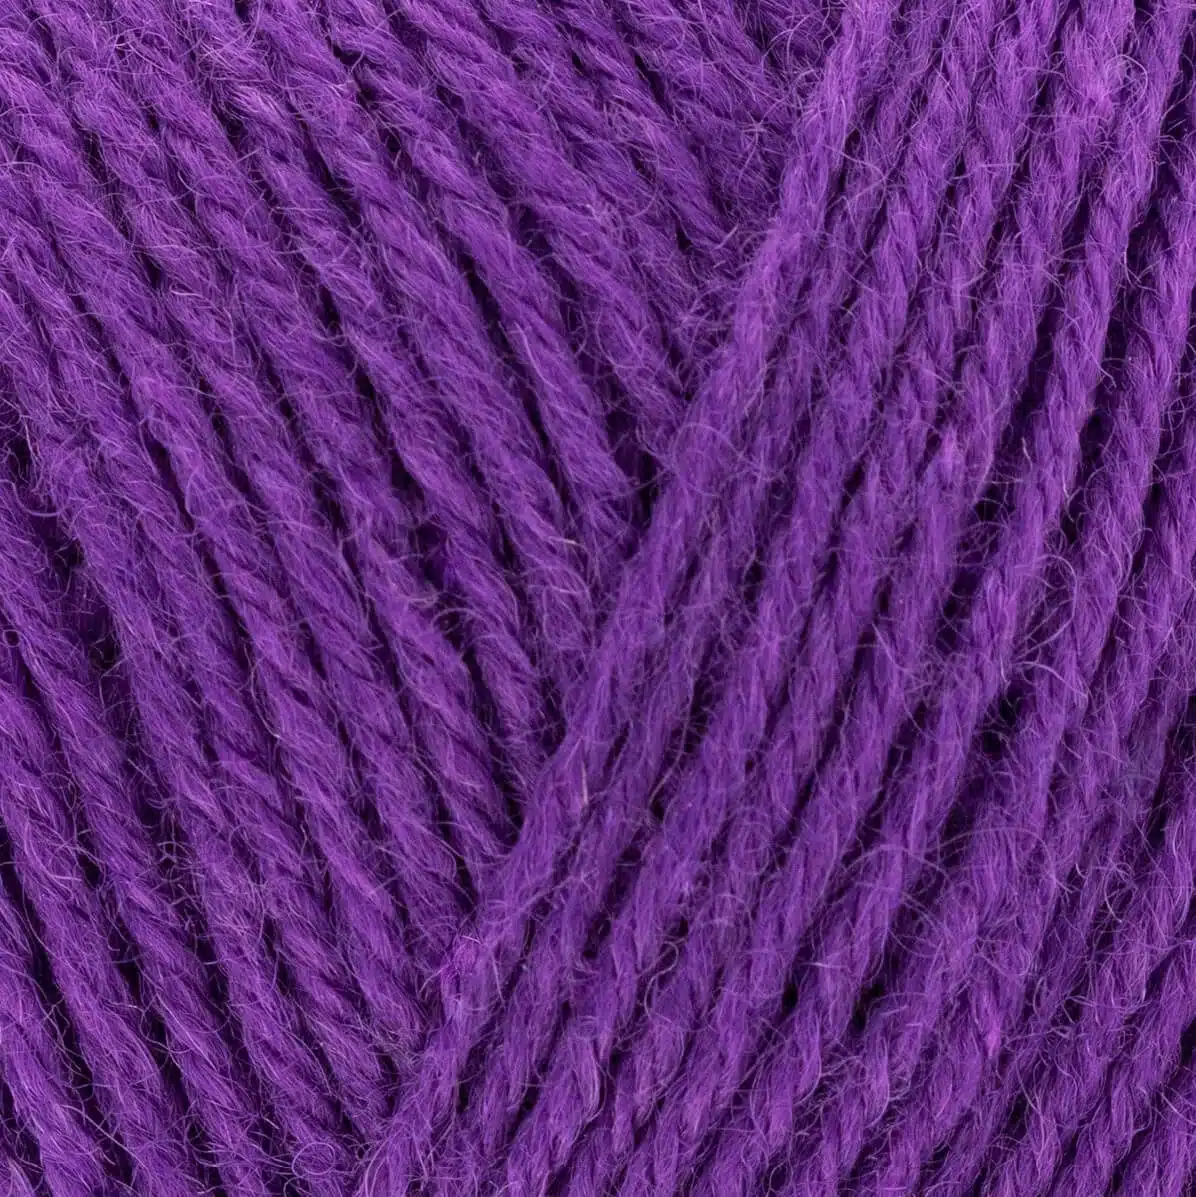 West Yorkshire Spinners Signature 4ply - Amethyst 1003